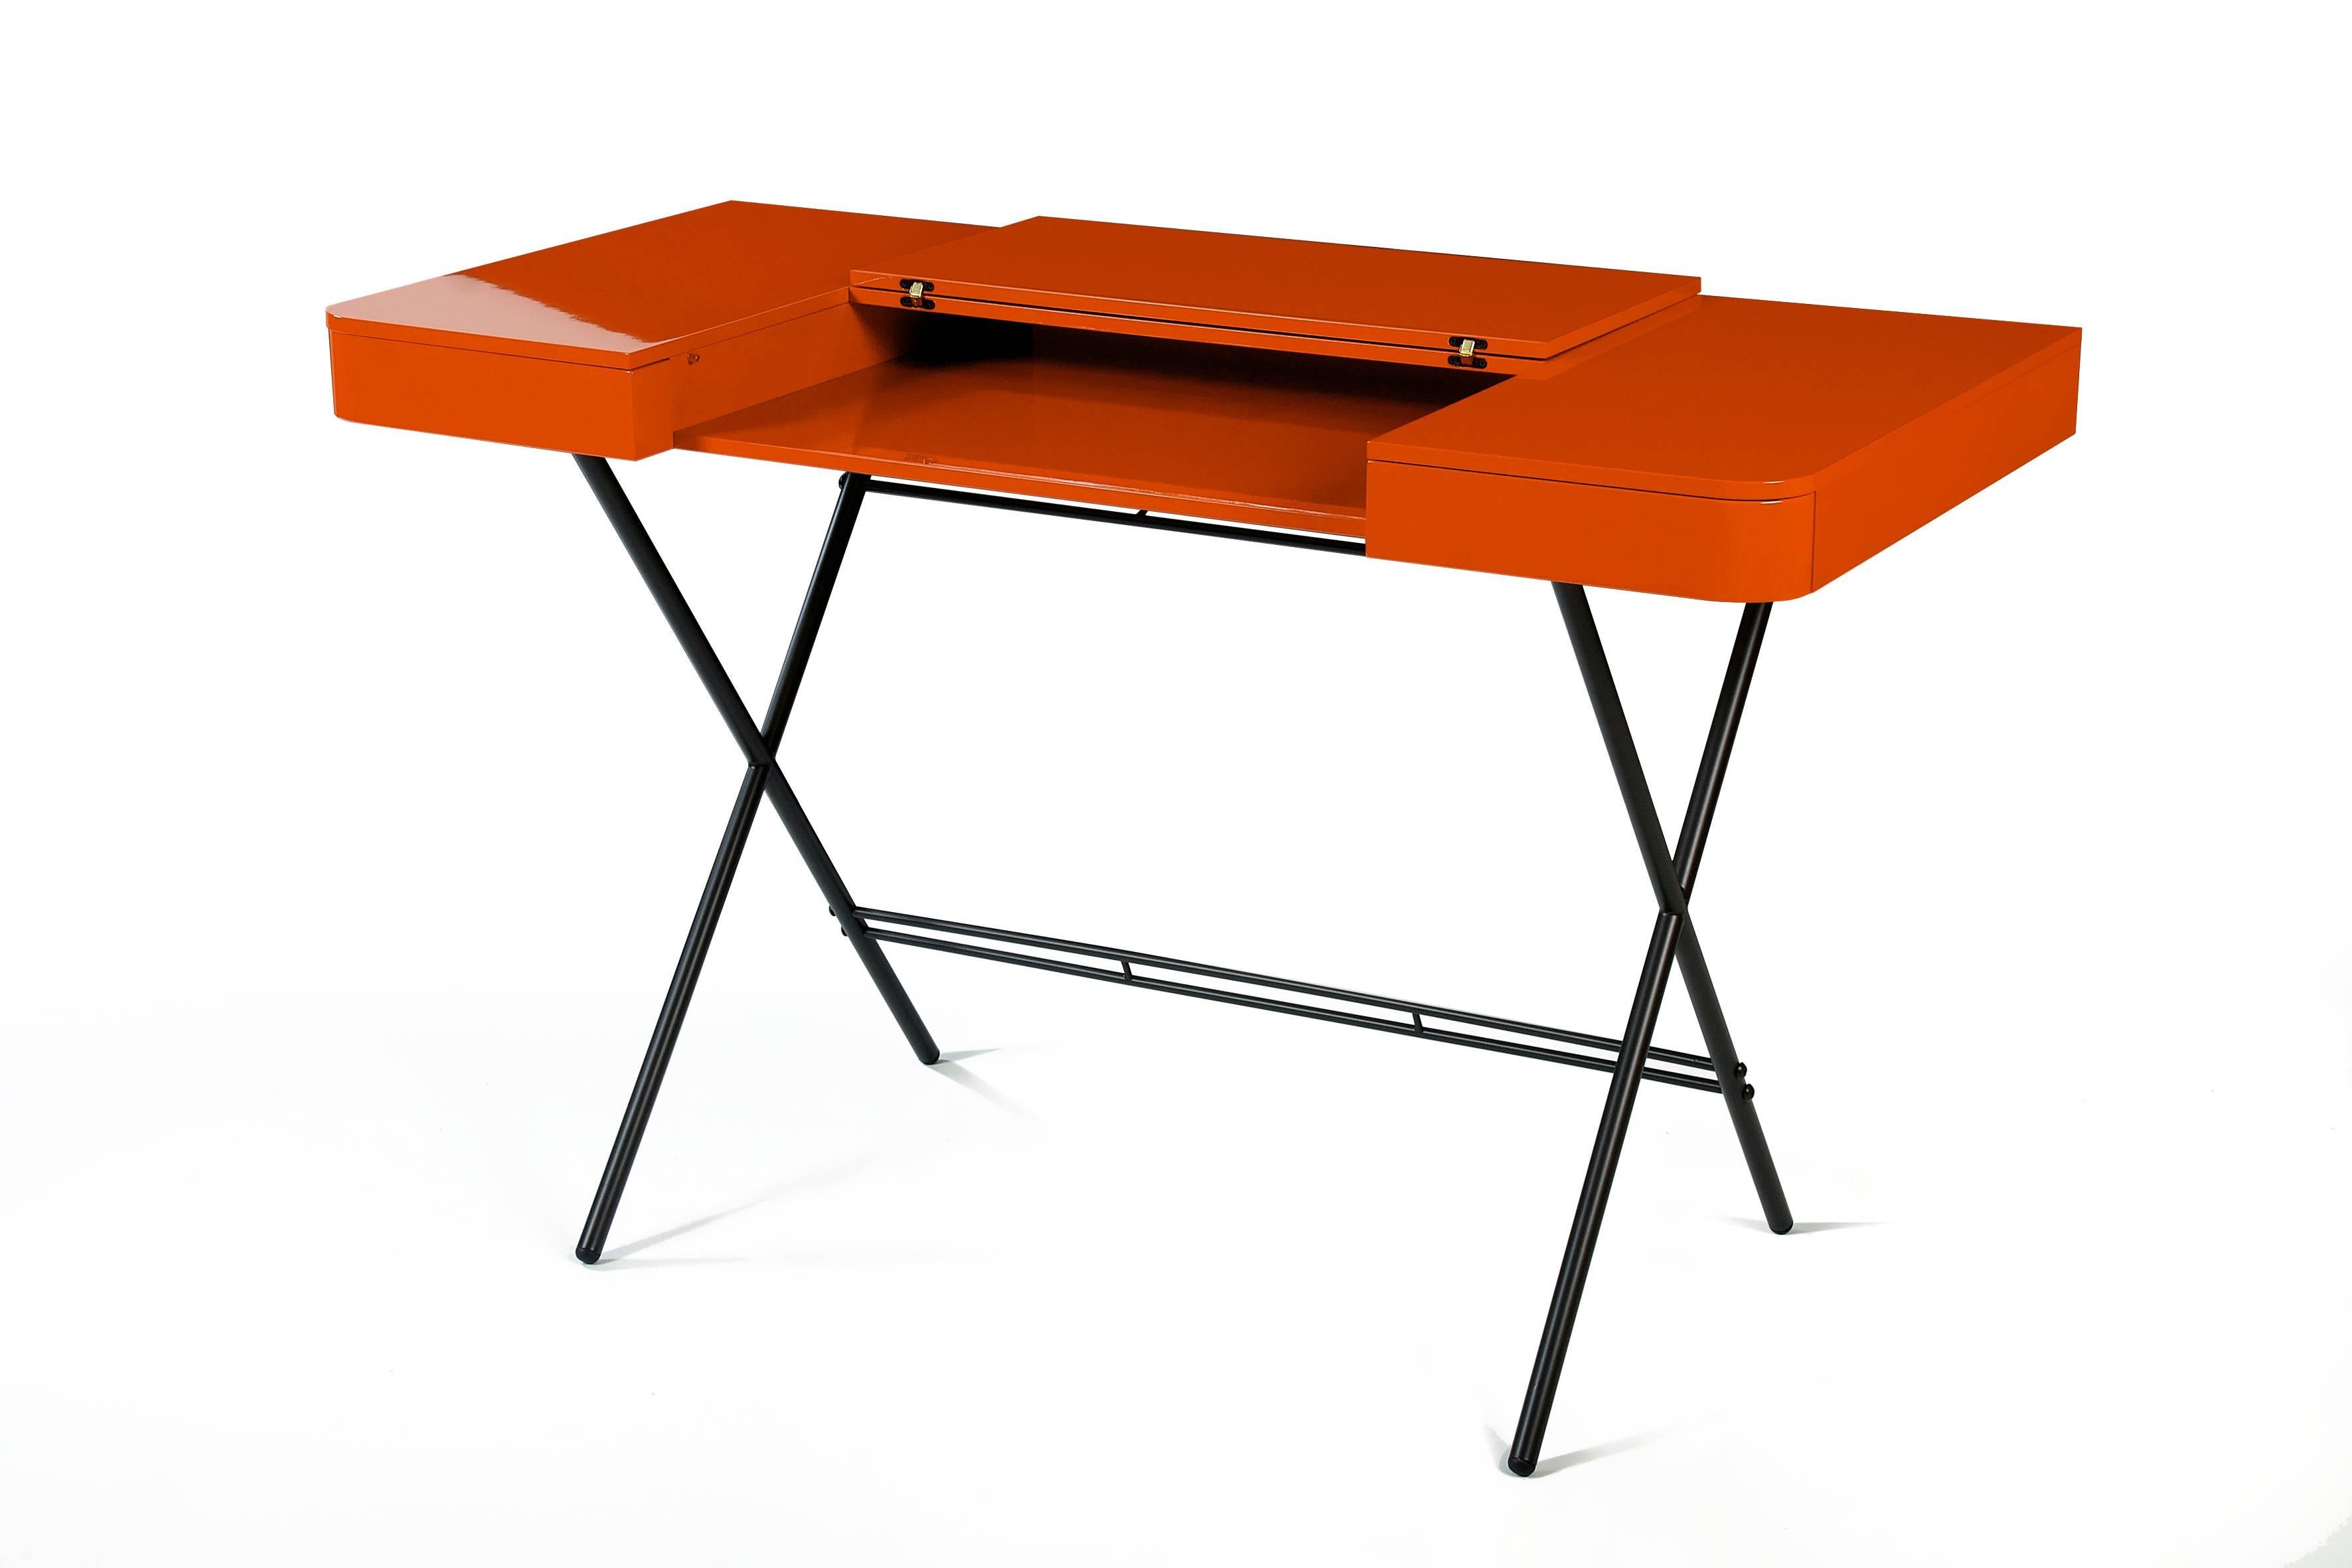 Contemporary Cosimo Desk by Marco Zanuso Jr. with Orange Glossy Lacquered Top im Zustand „Neu“ im Angebot in Paris, FR